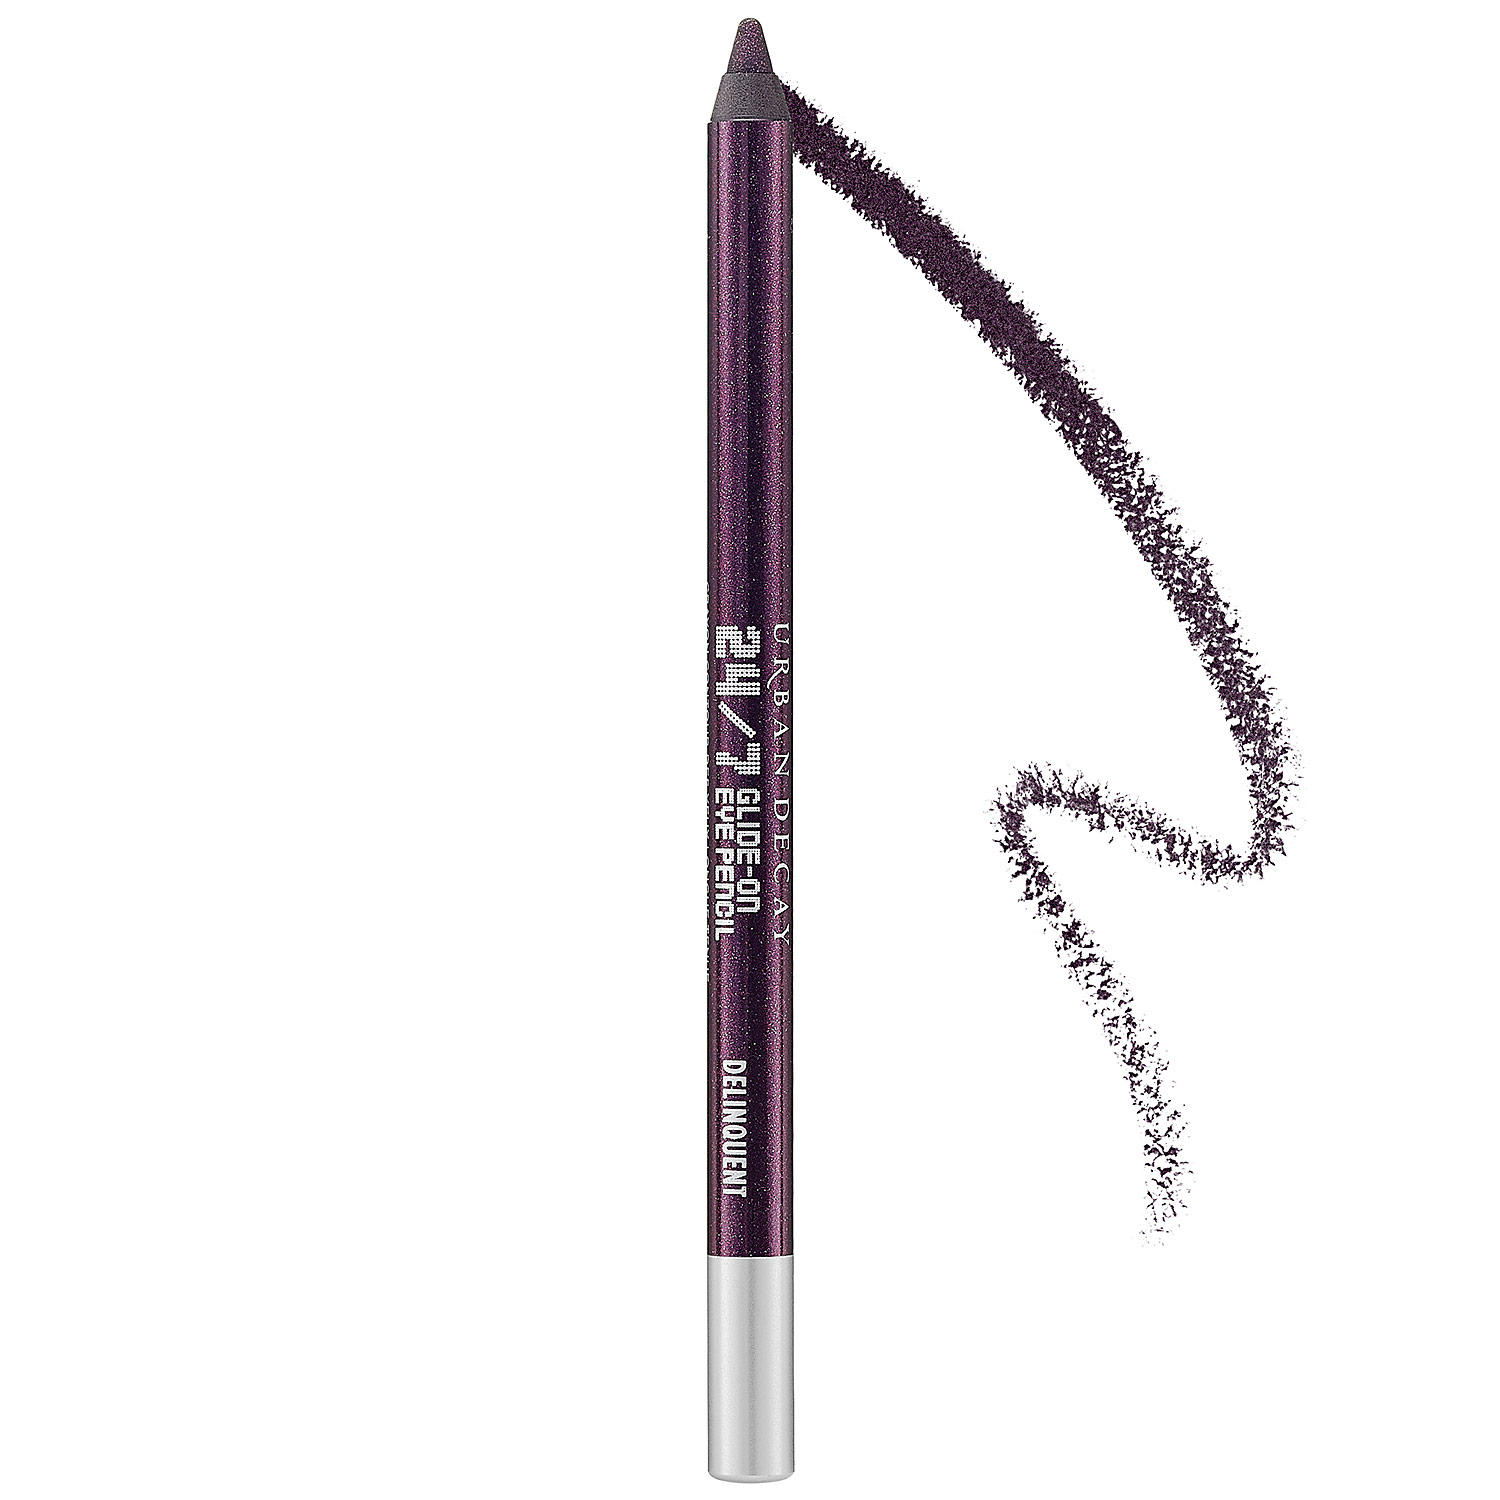 Urban Decay 24/7 Glide-On Eyeliner Delinquent